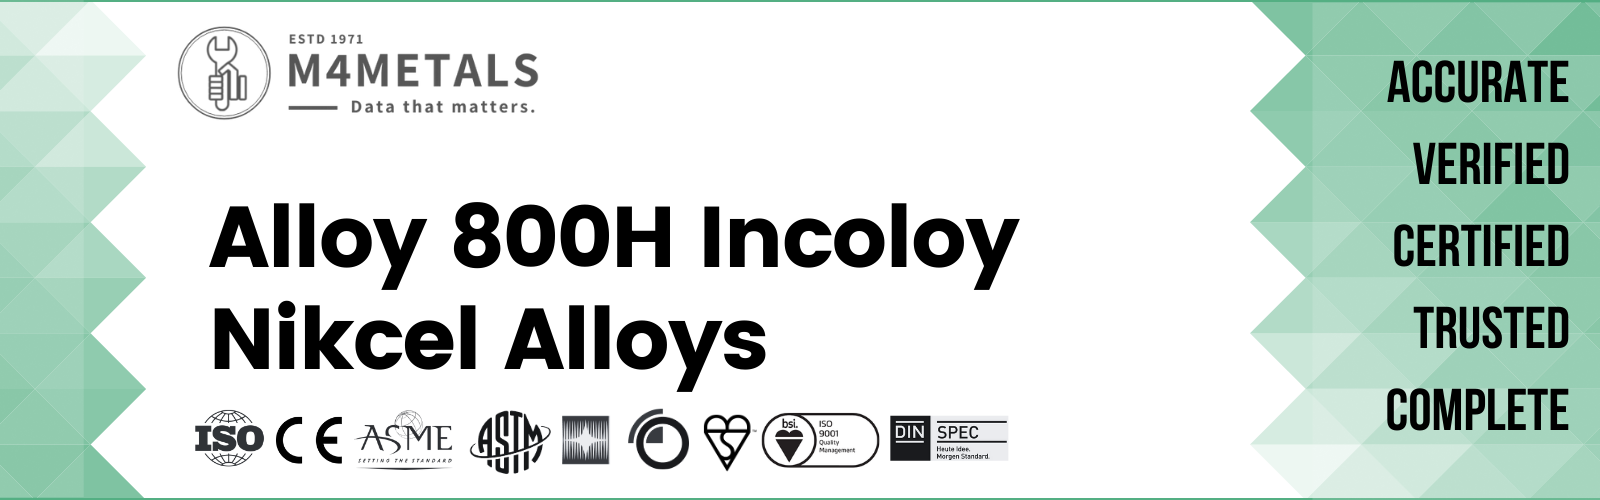 Incoloy Alloy 800H